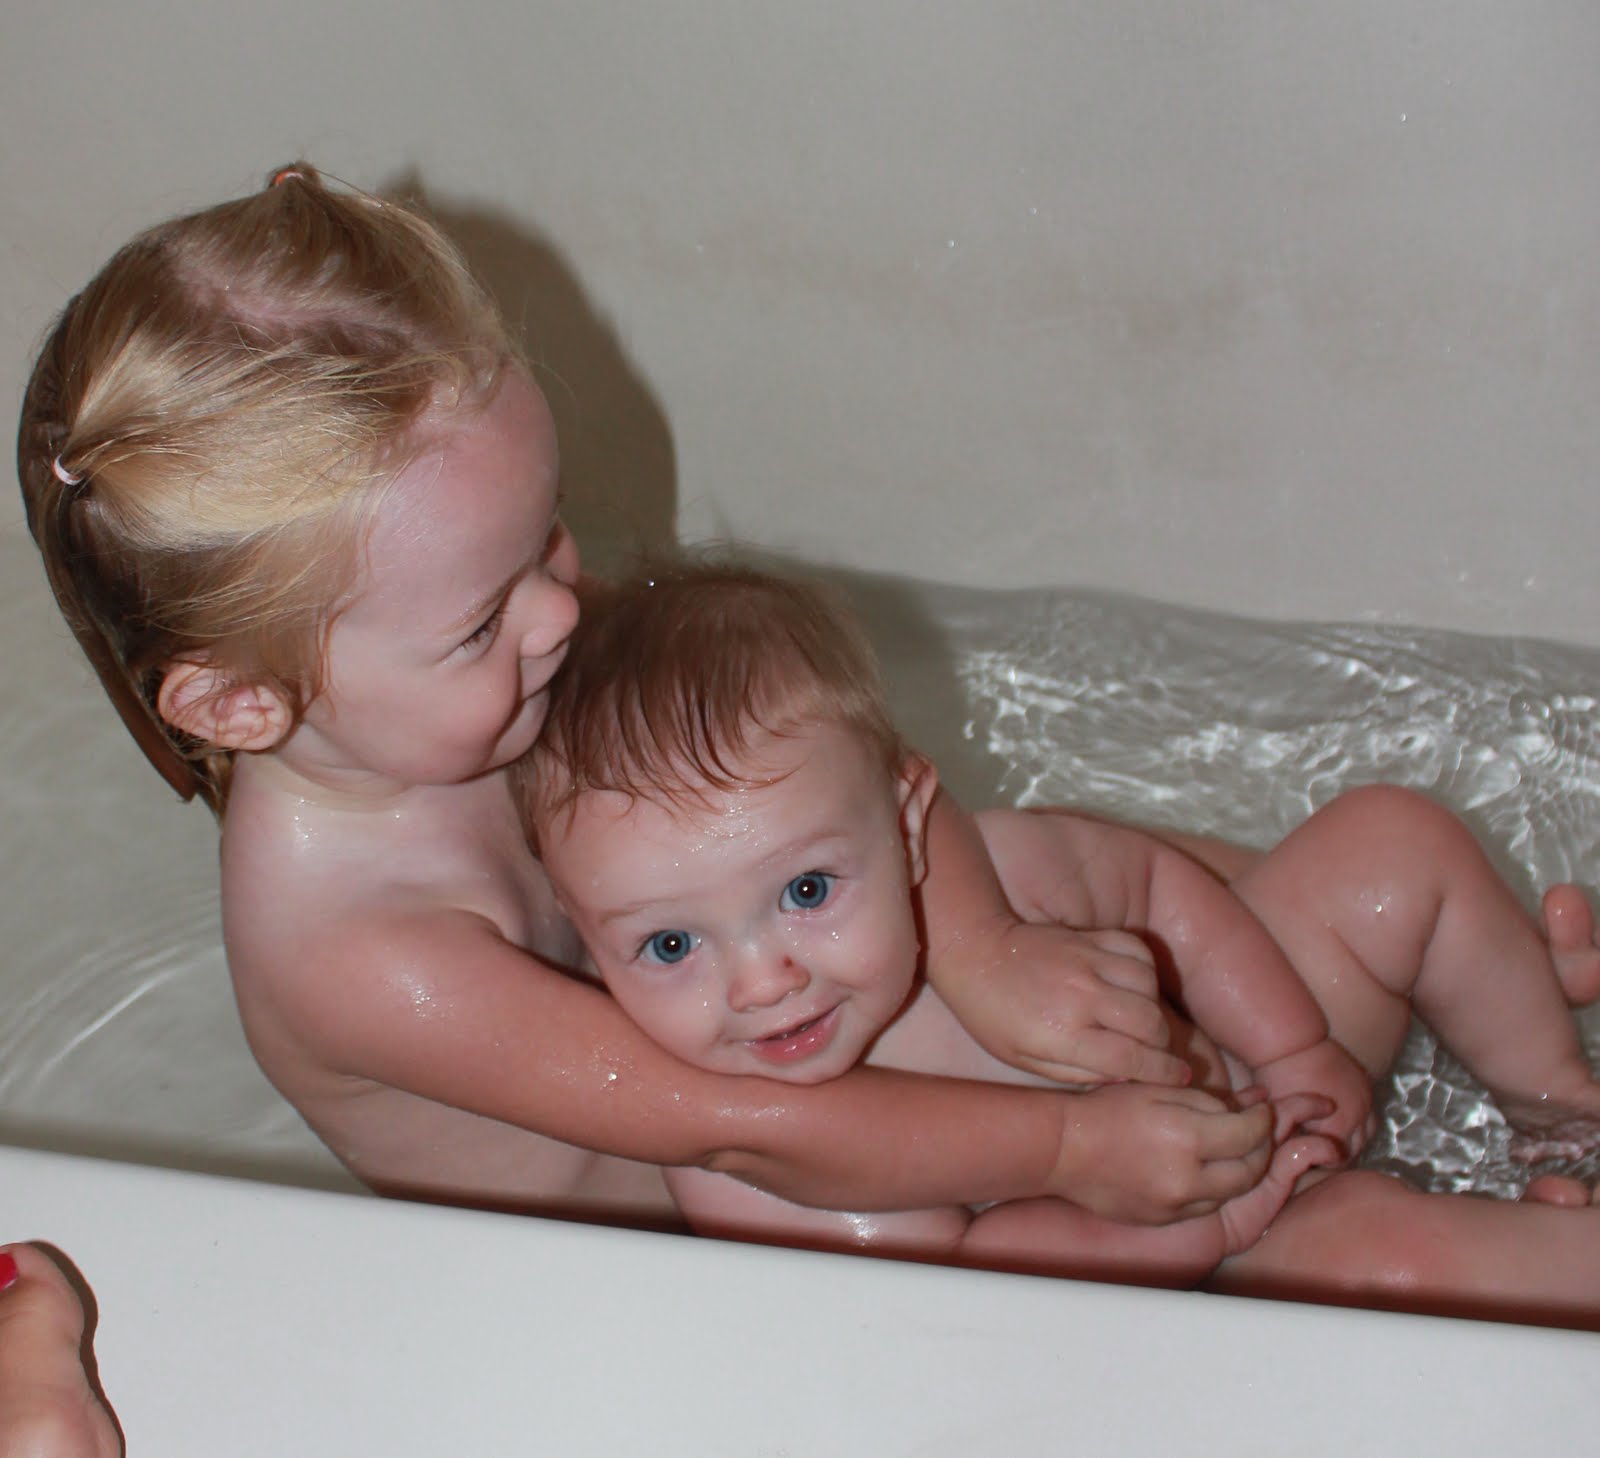 Bath time is always lots of fun at our house. 